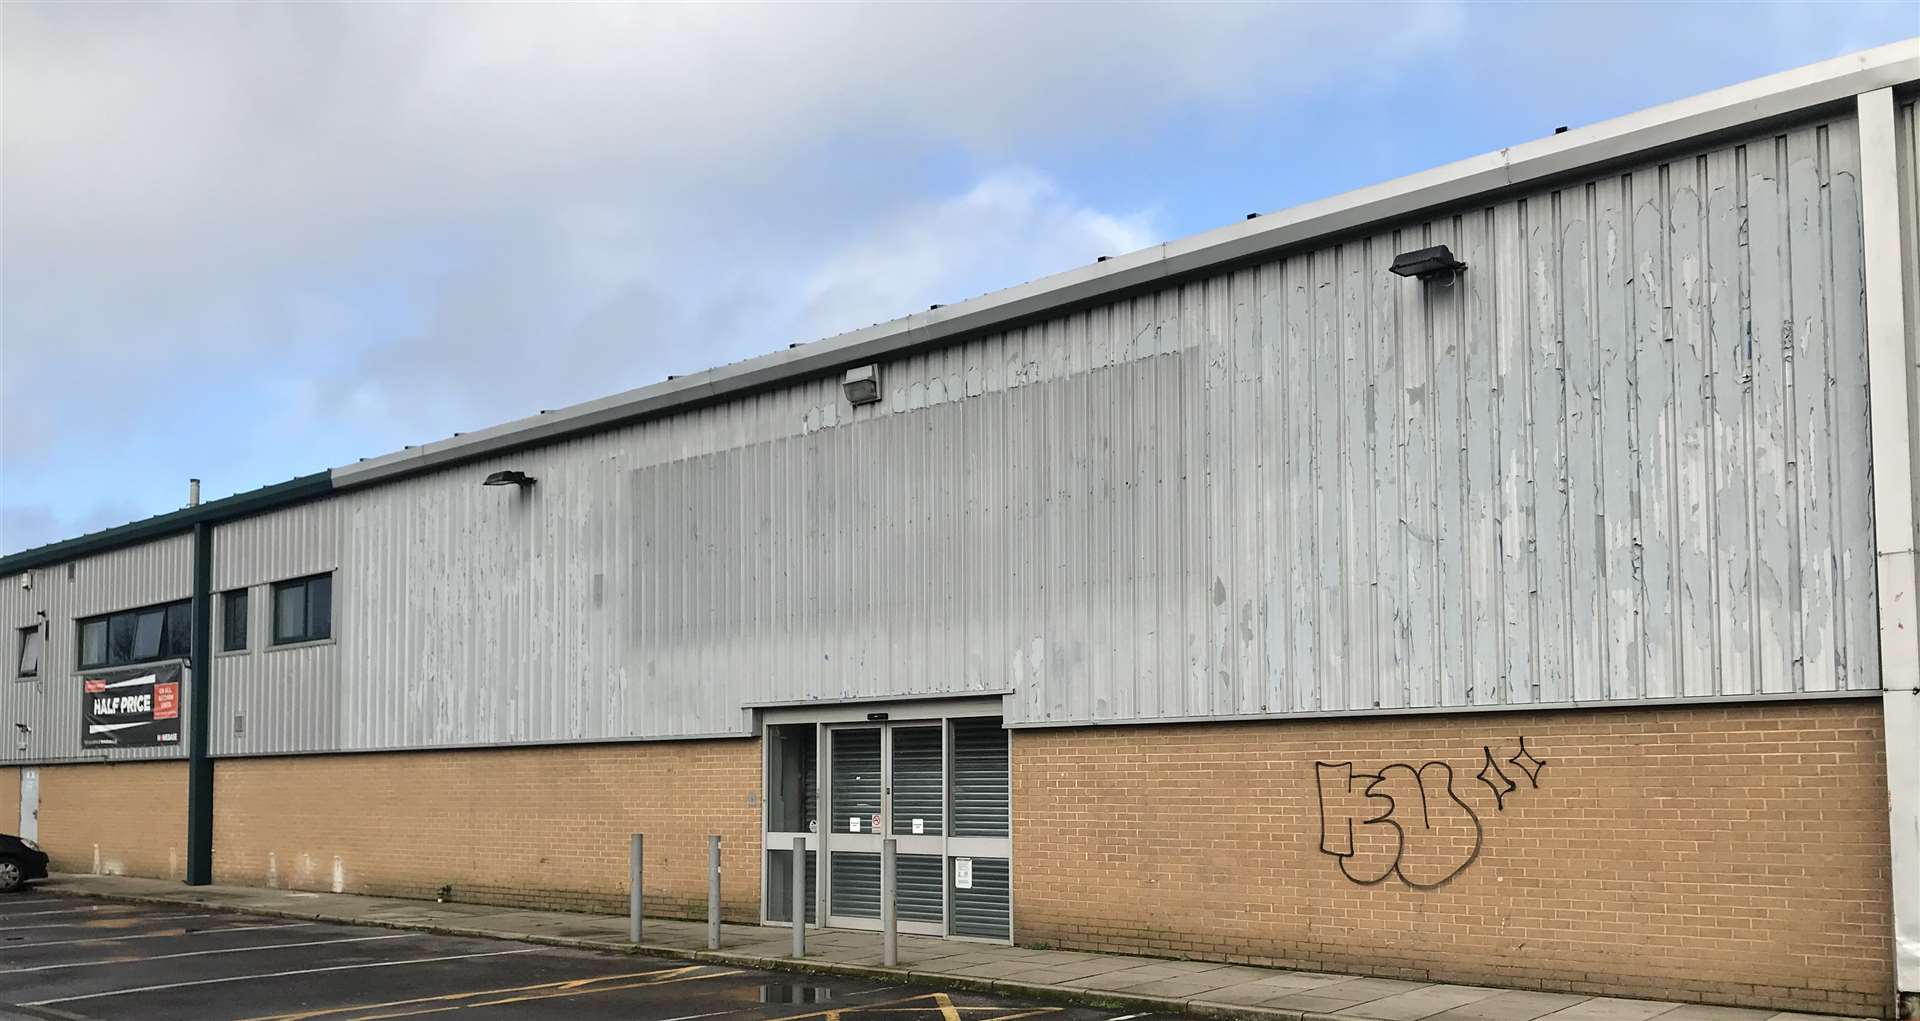 The unit previously occupied by Halfords in Eddington Business Park